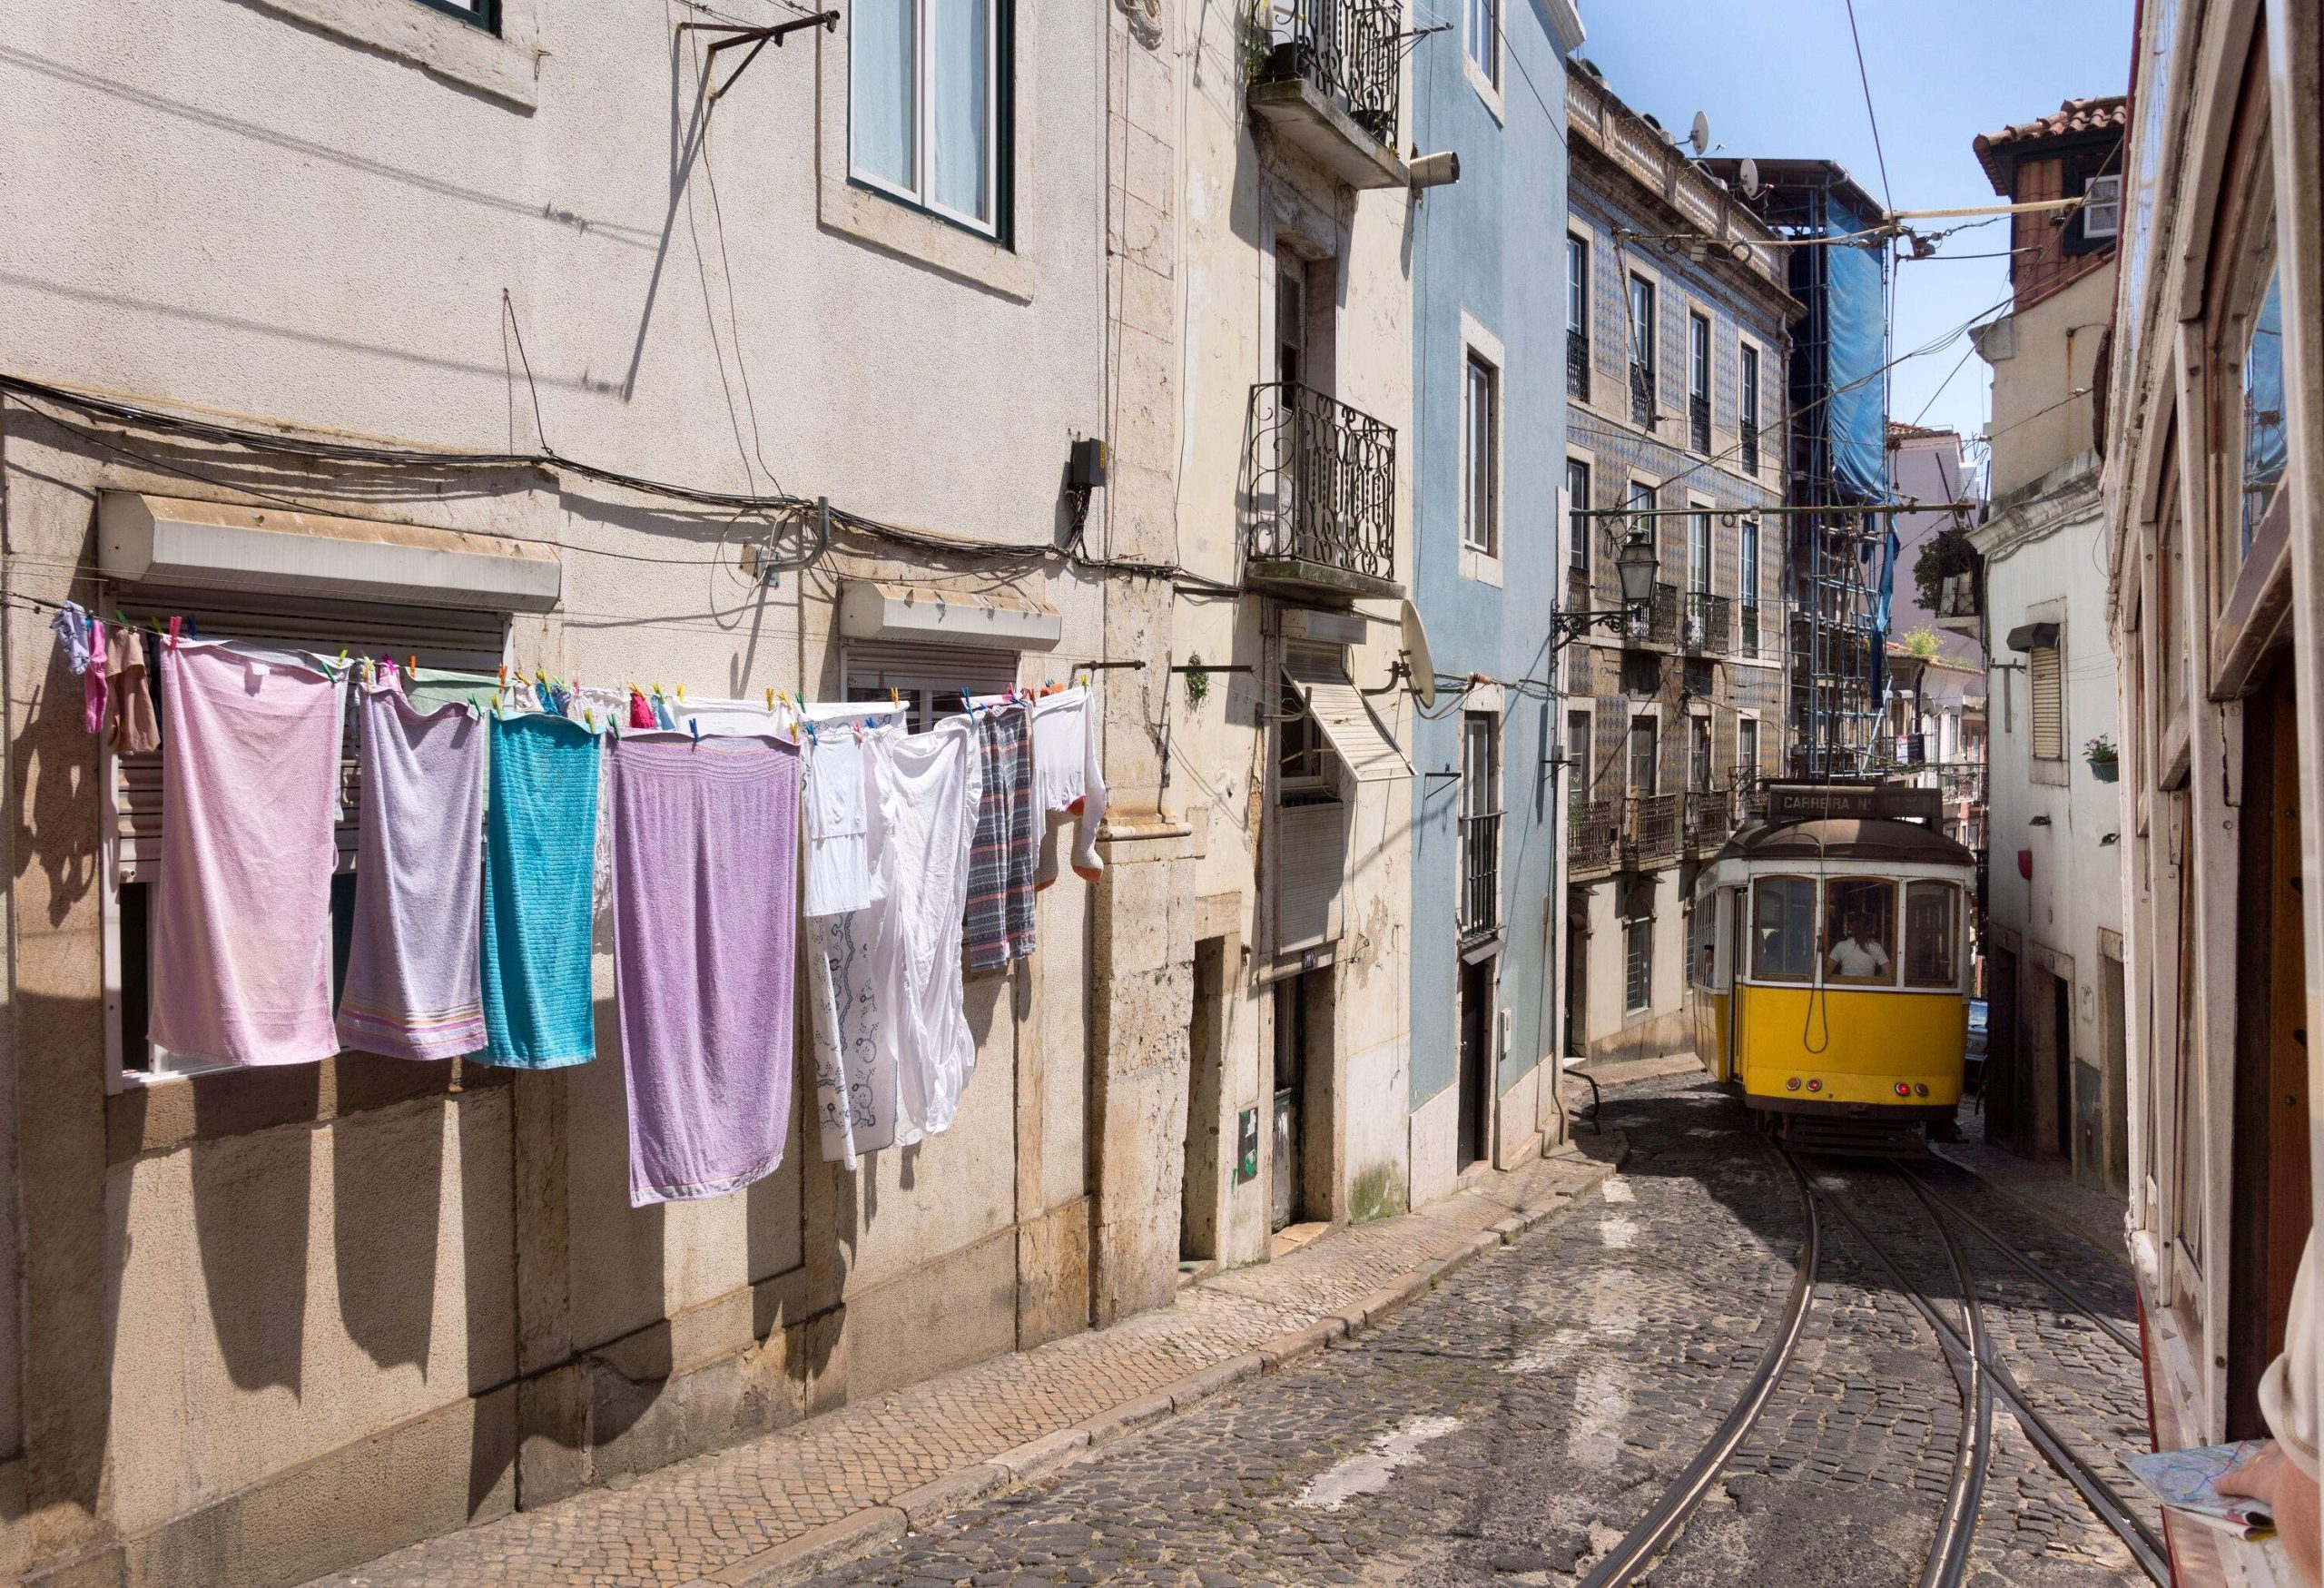 A classic tram passes through a narrow street lined with traditional houses with hanging clothes outside.